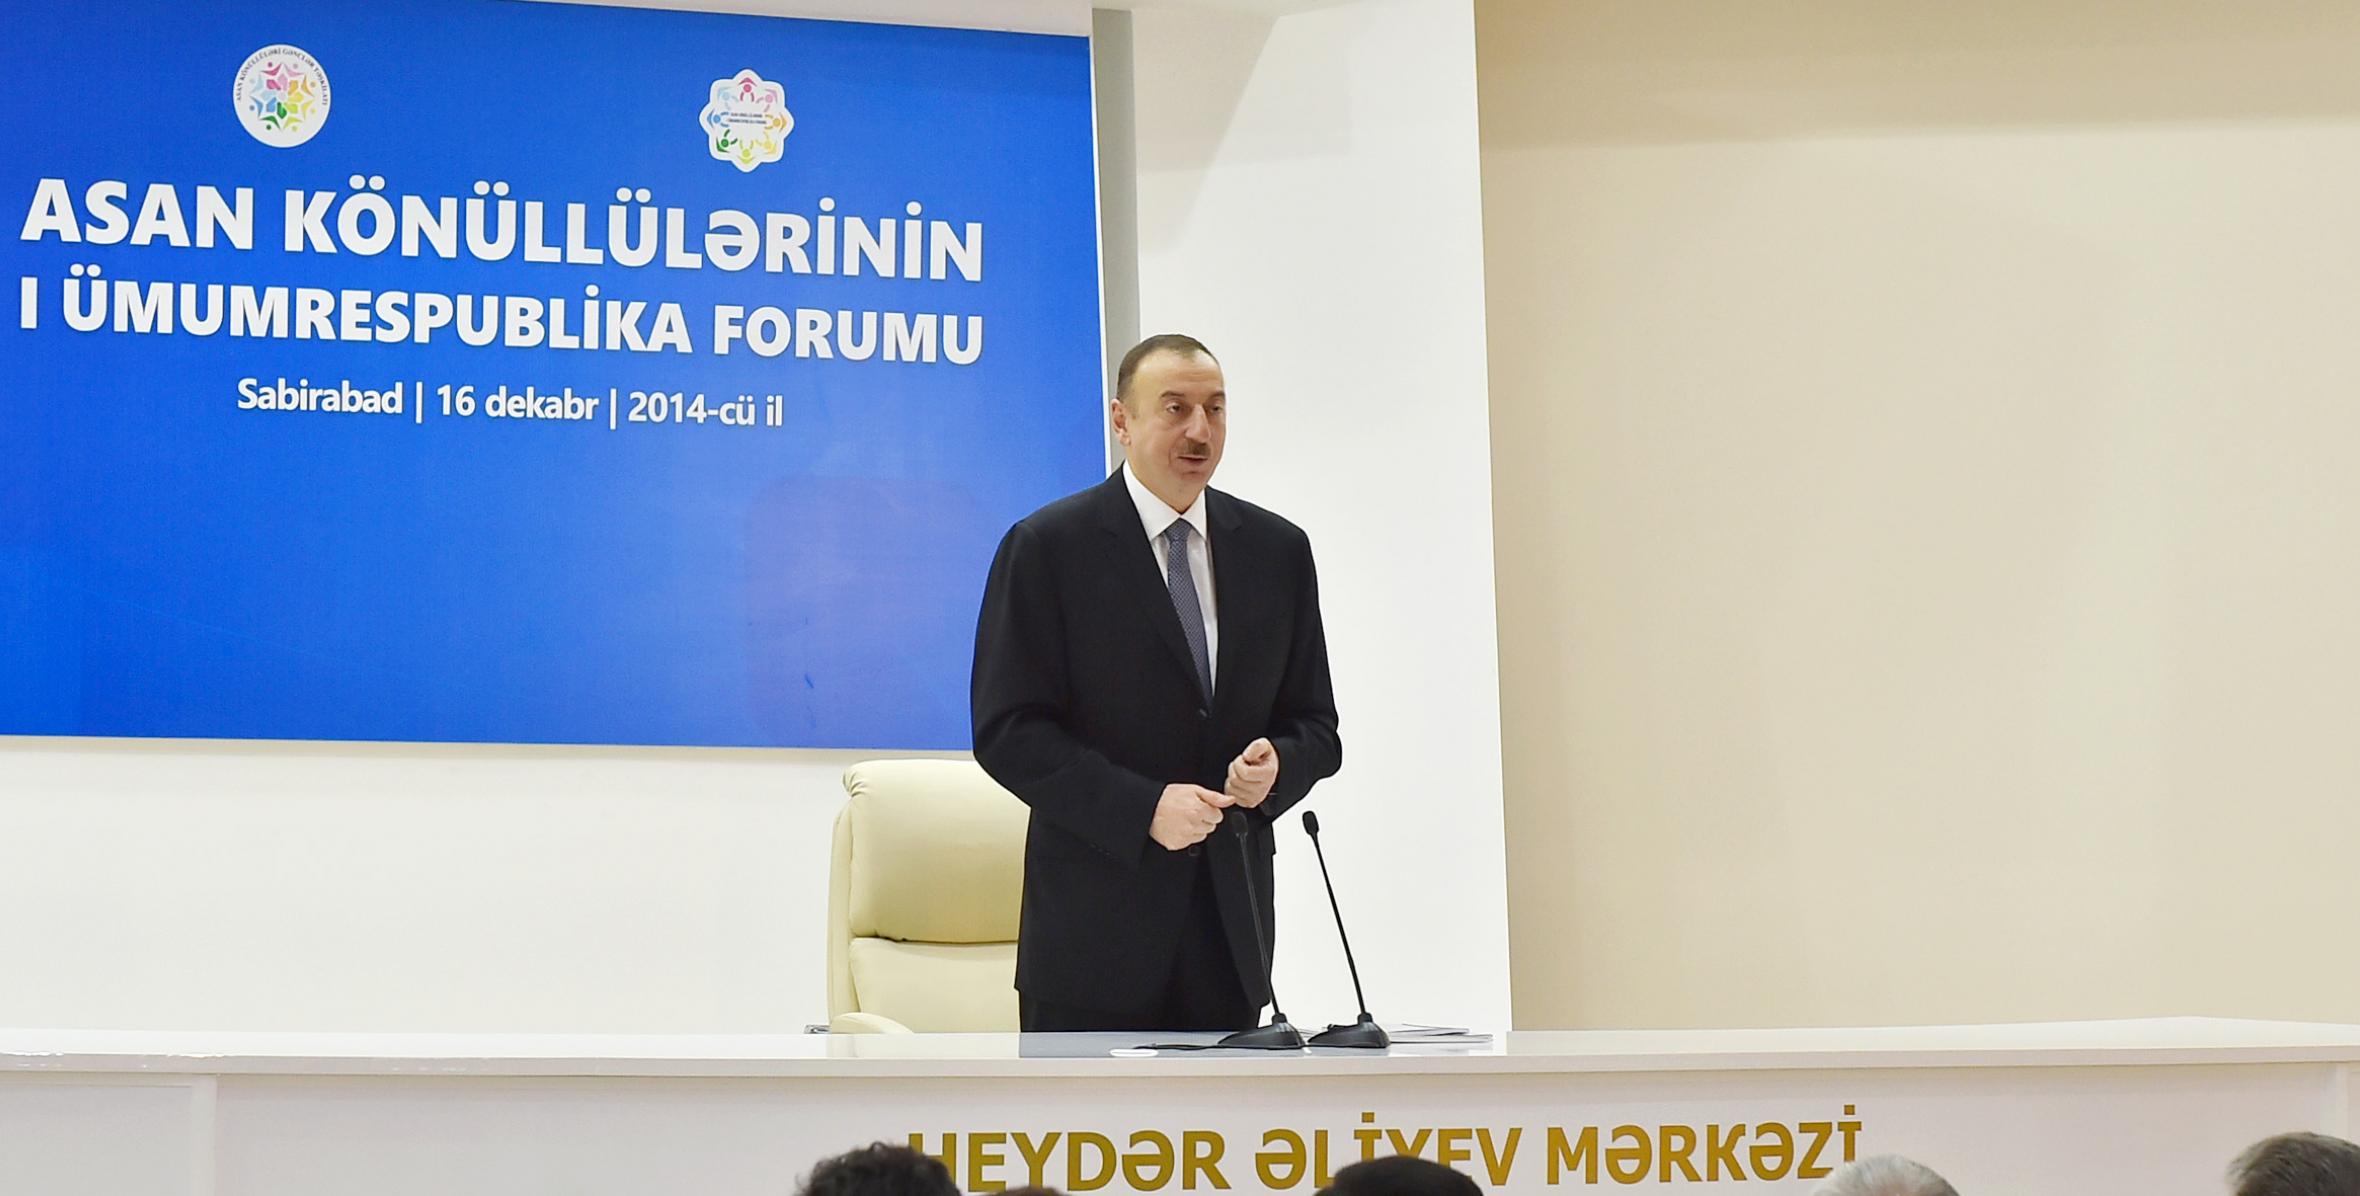 Ilham Aliyev attended the first All-Republican Forum of ASAN Volunteers